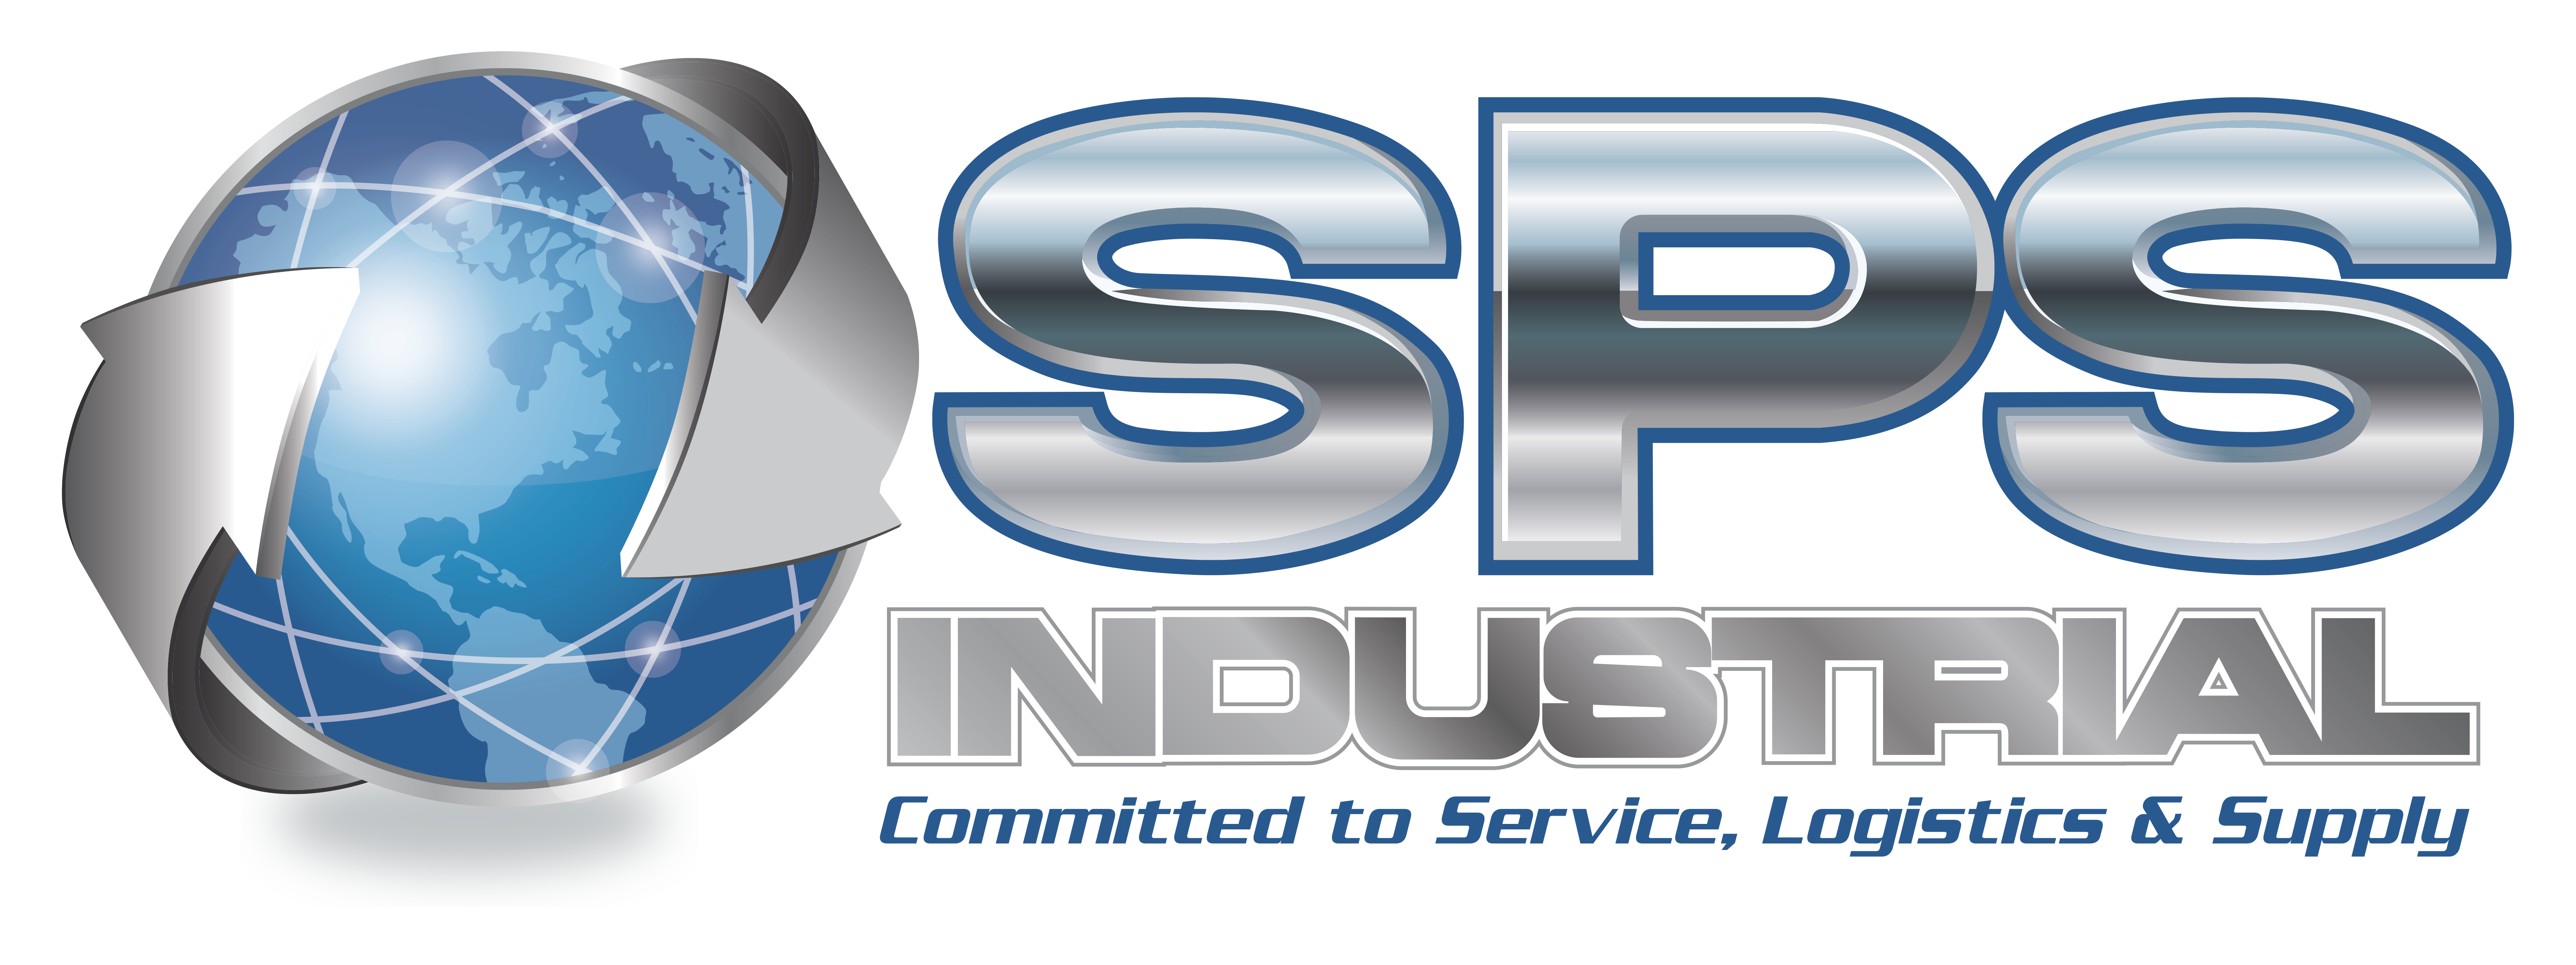 SPS Industrial Help Center home page